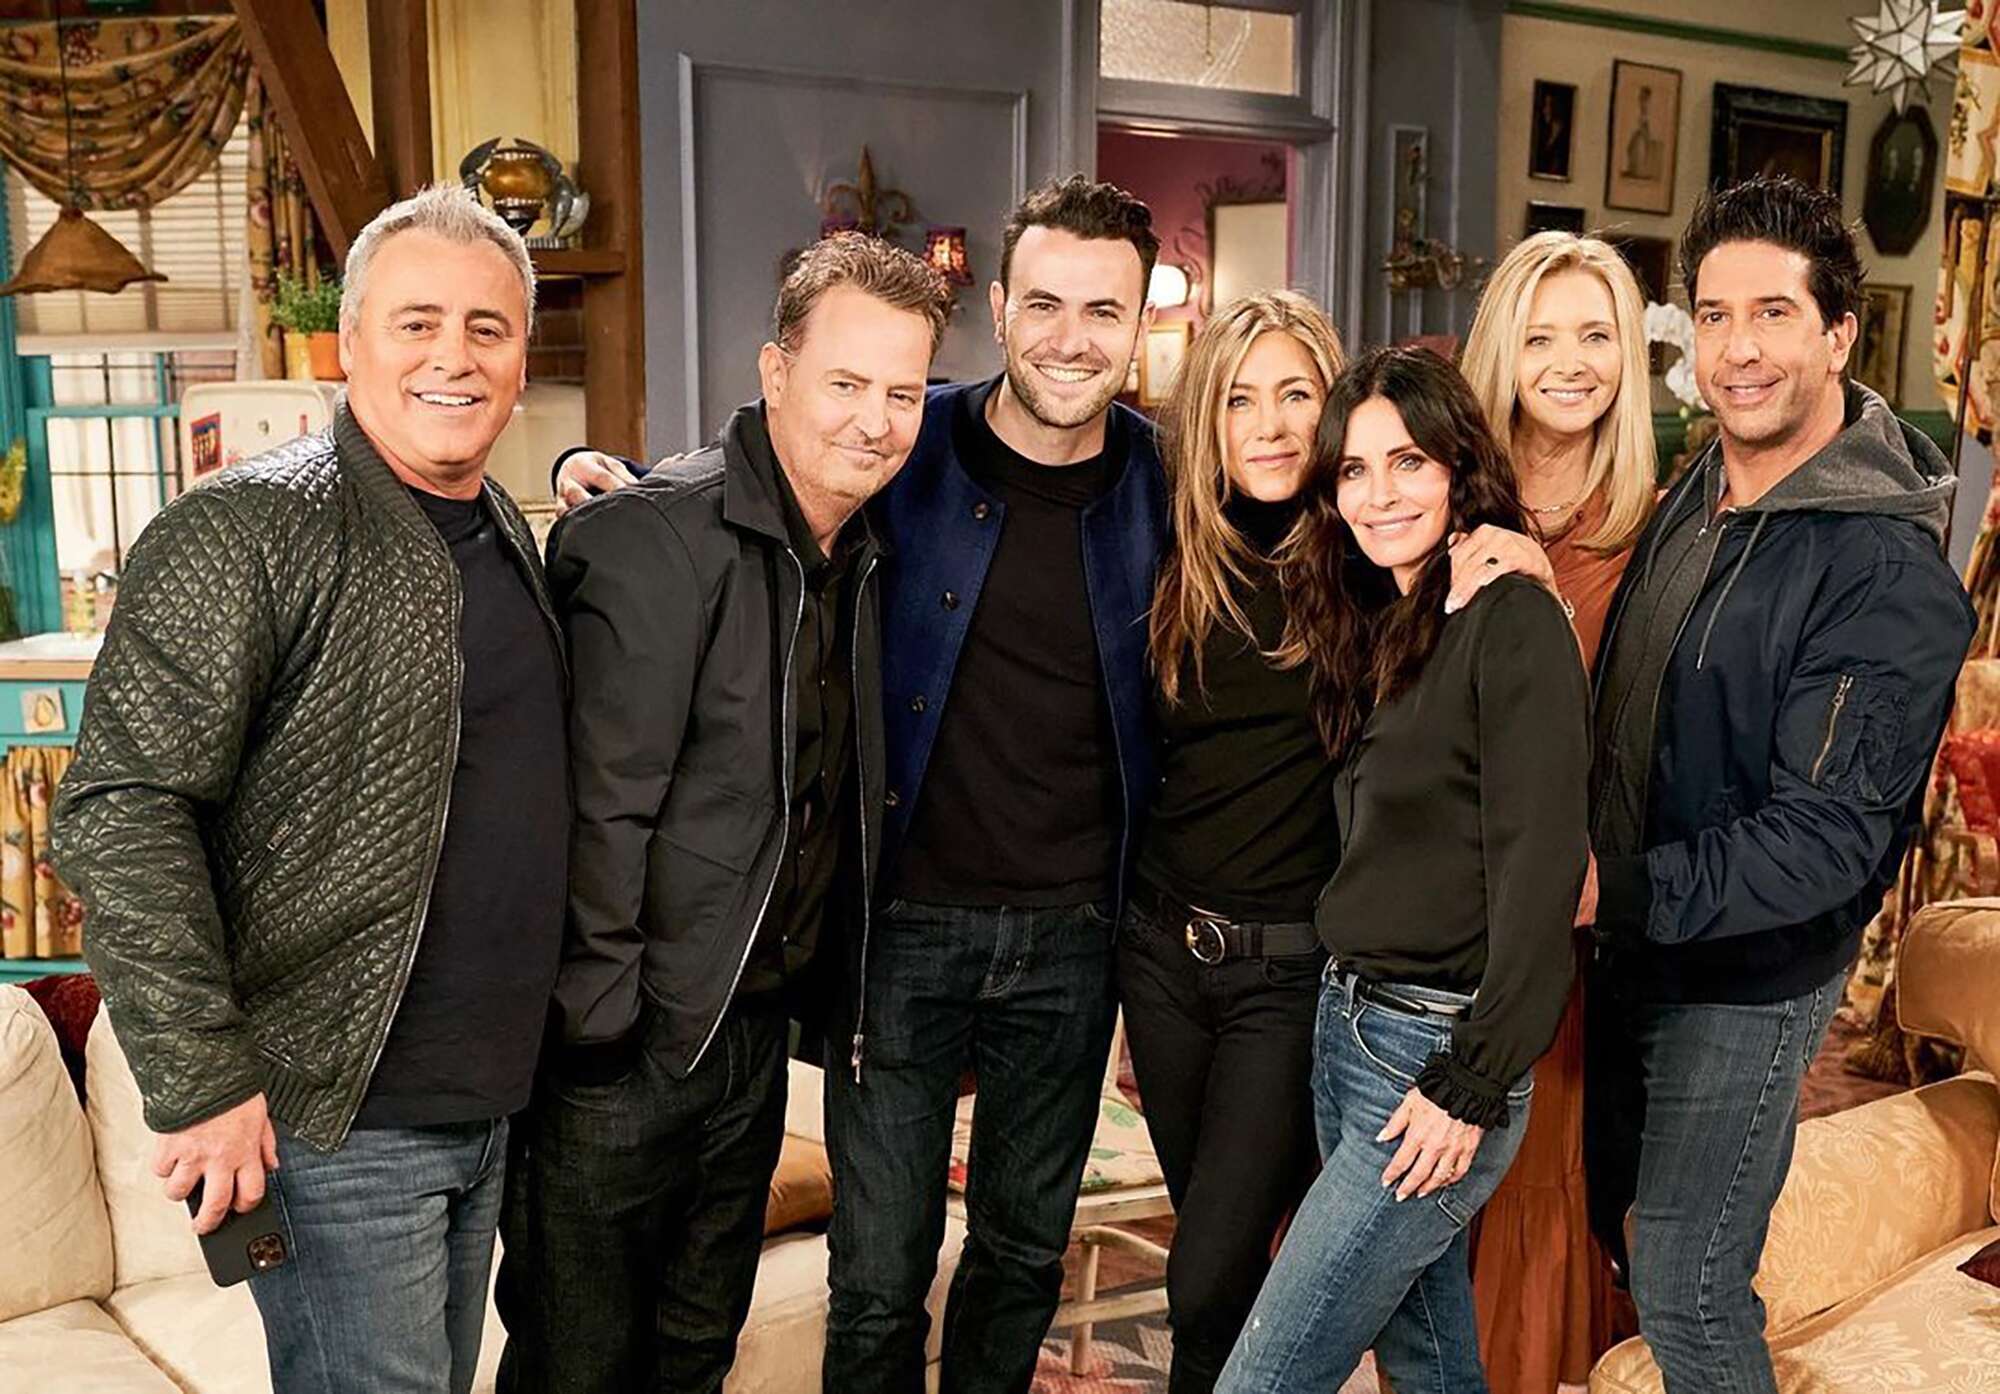 So, Is Friends Reunion A Movie Or Series?